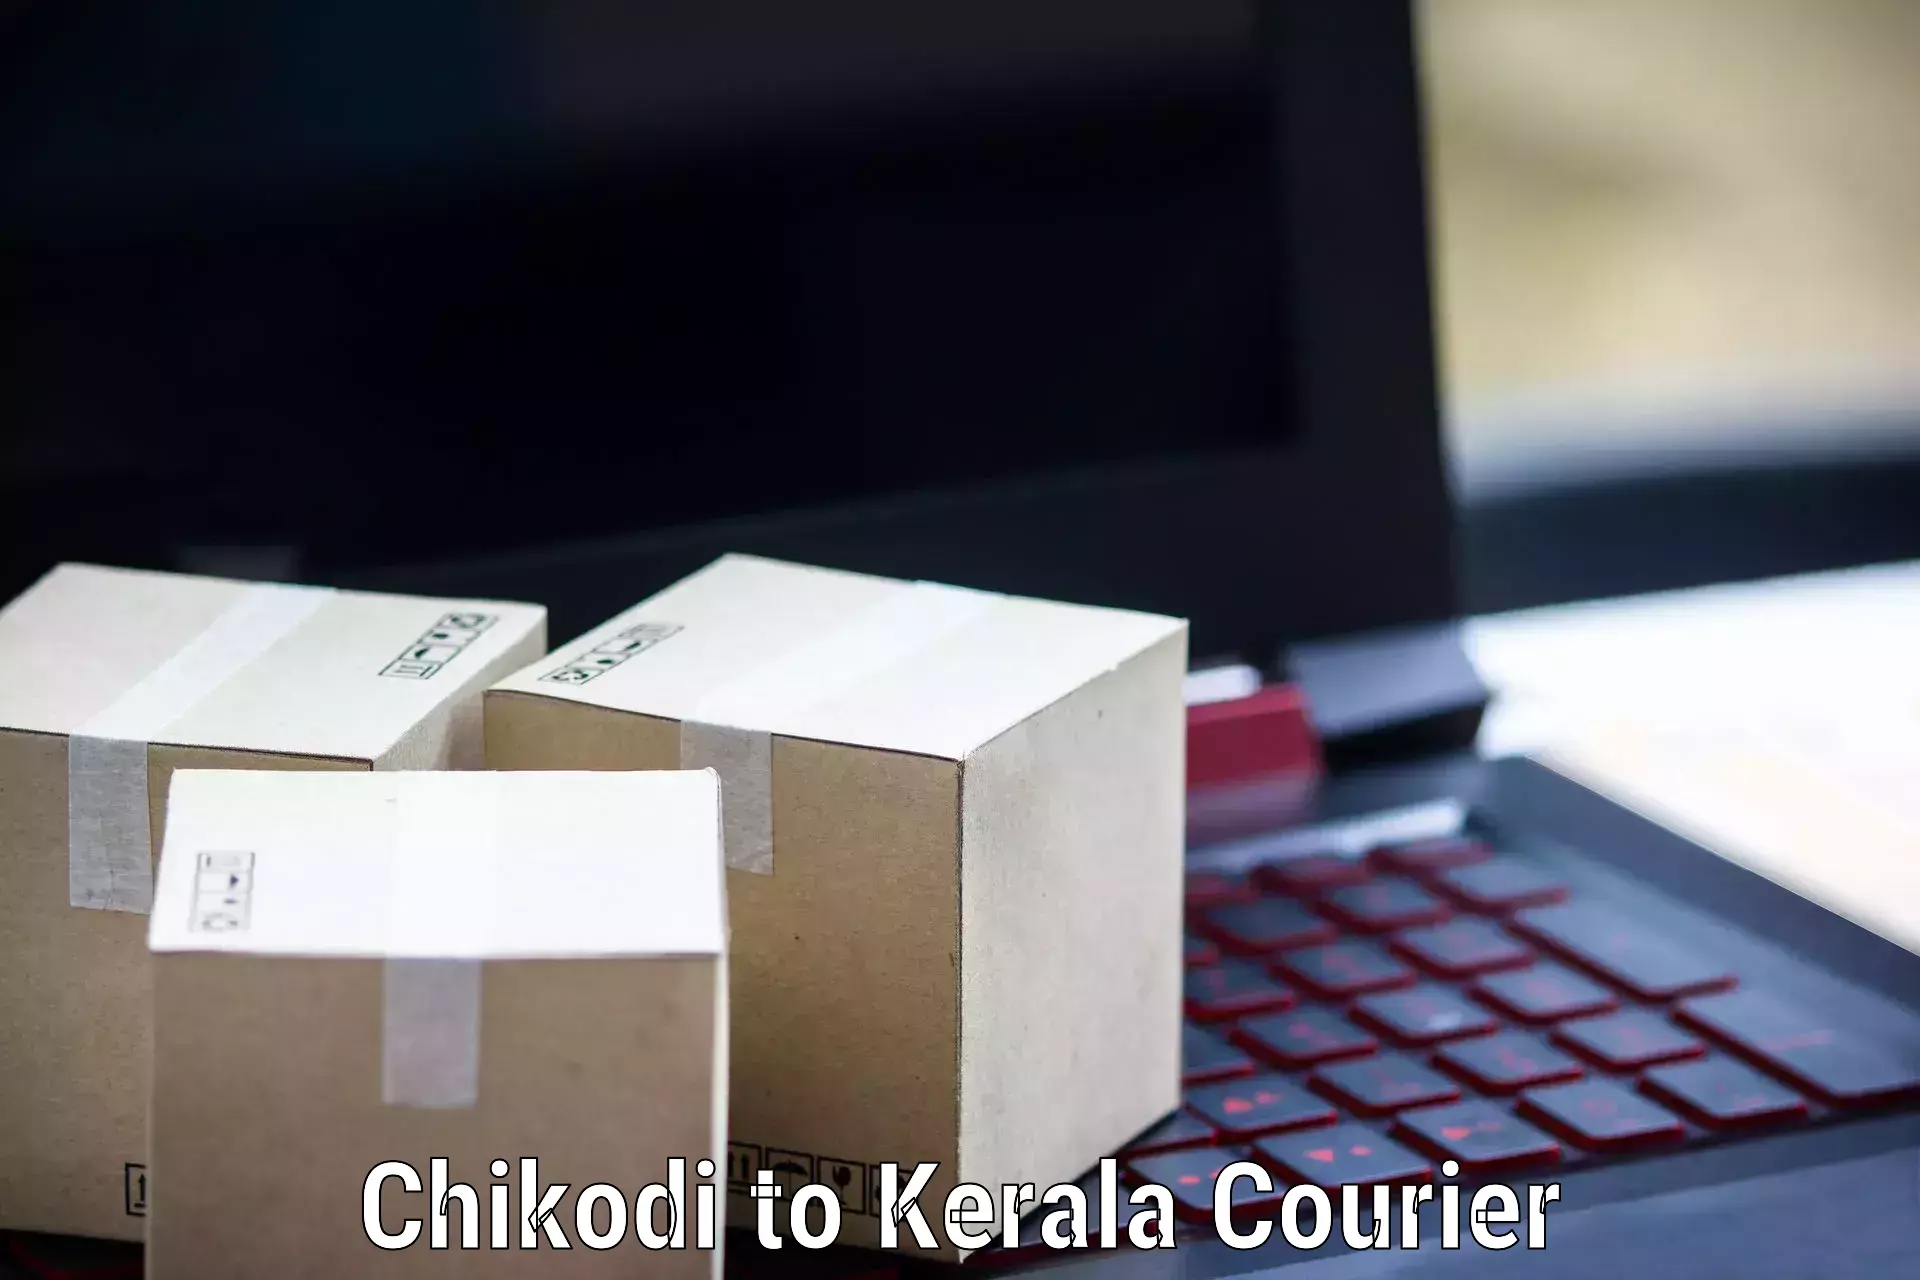 Express package transport in Chikodi to Trivandrum